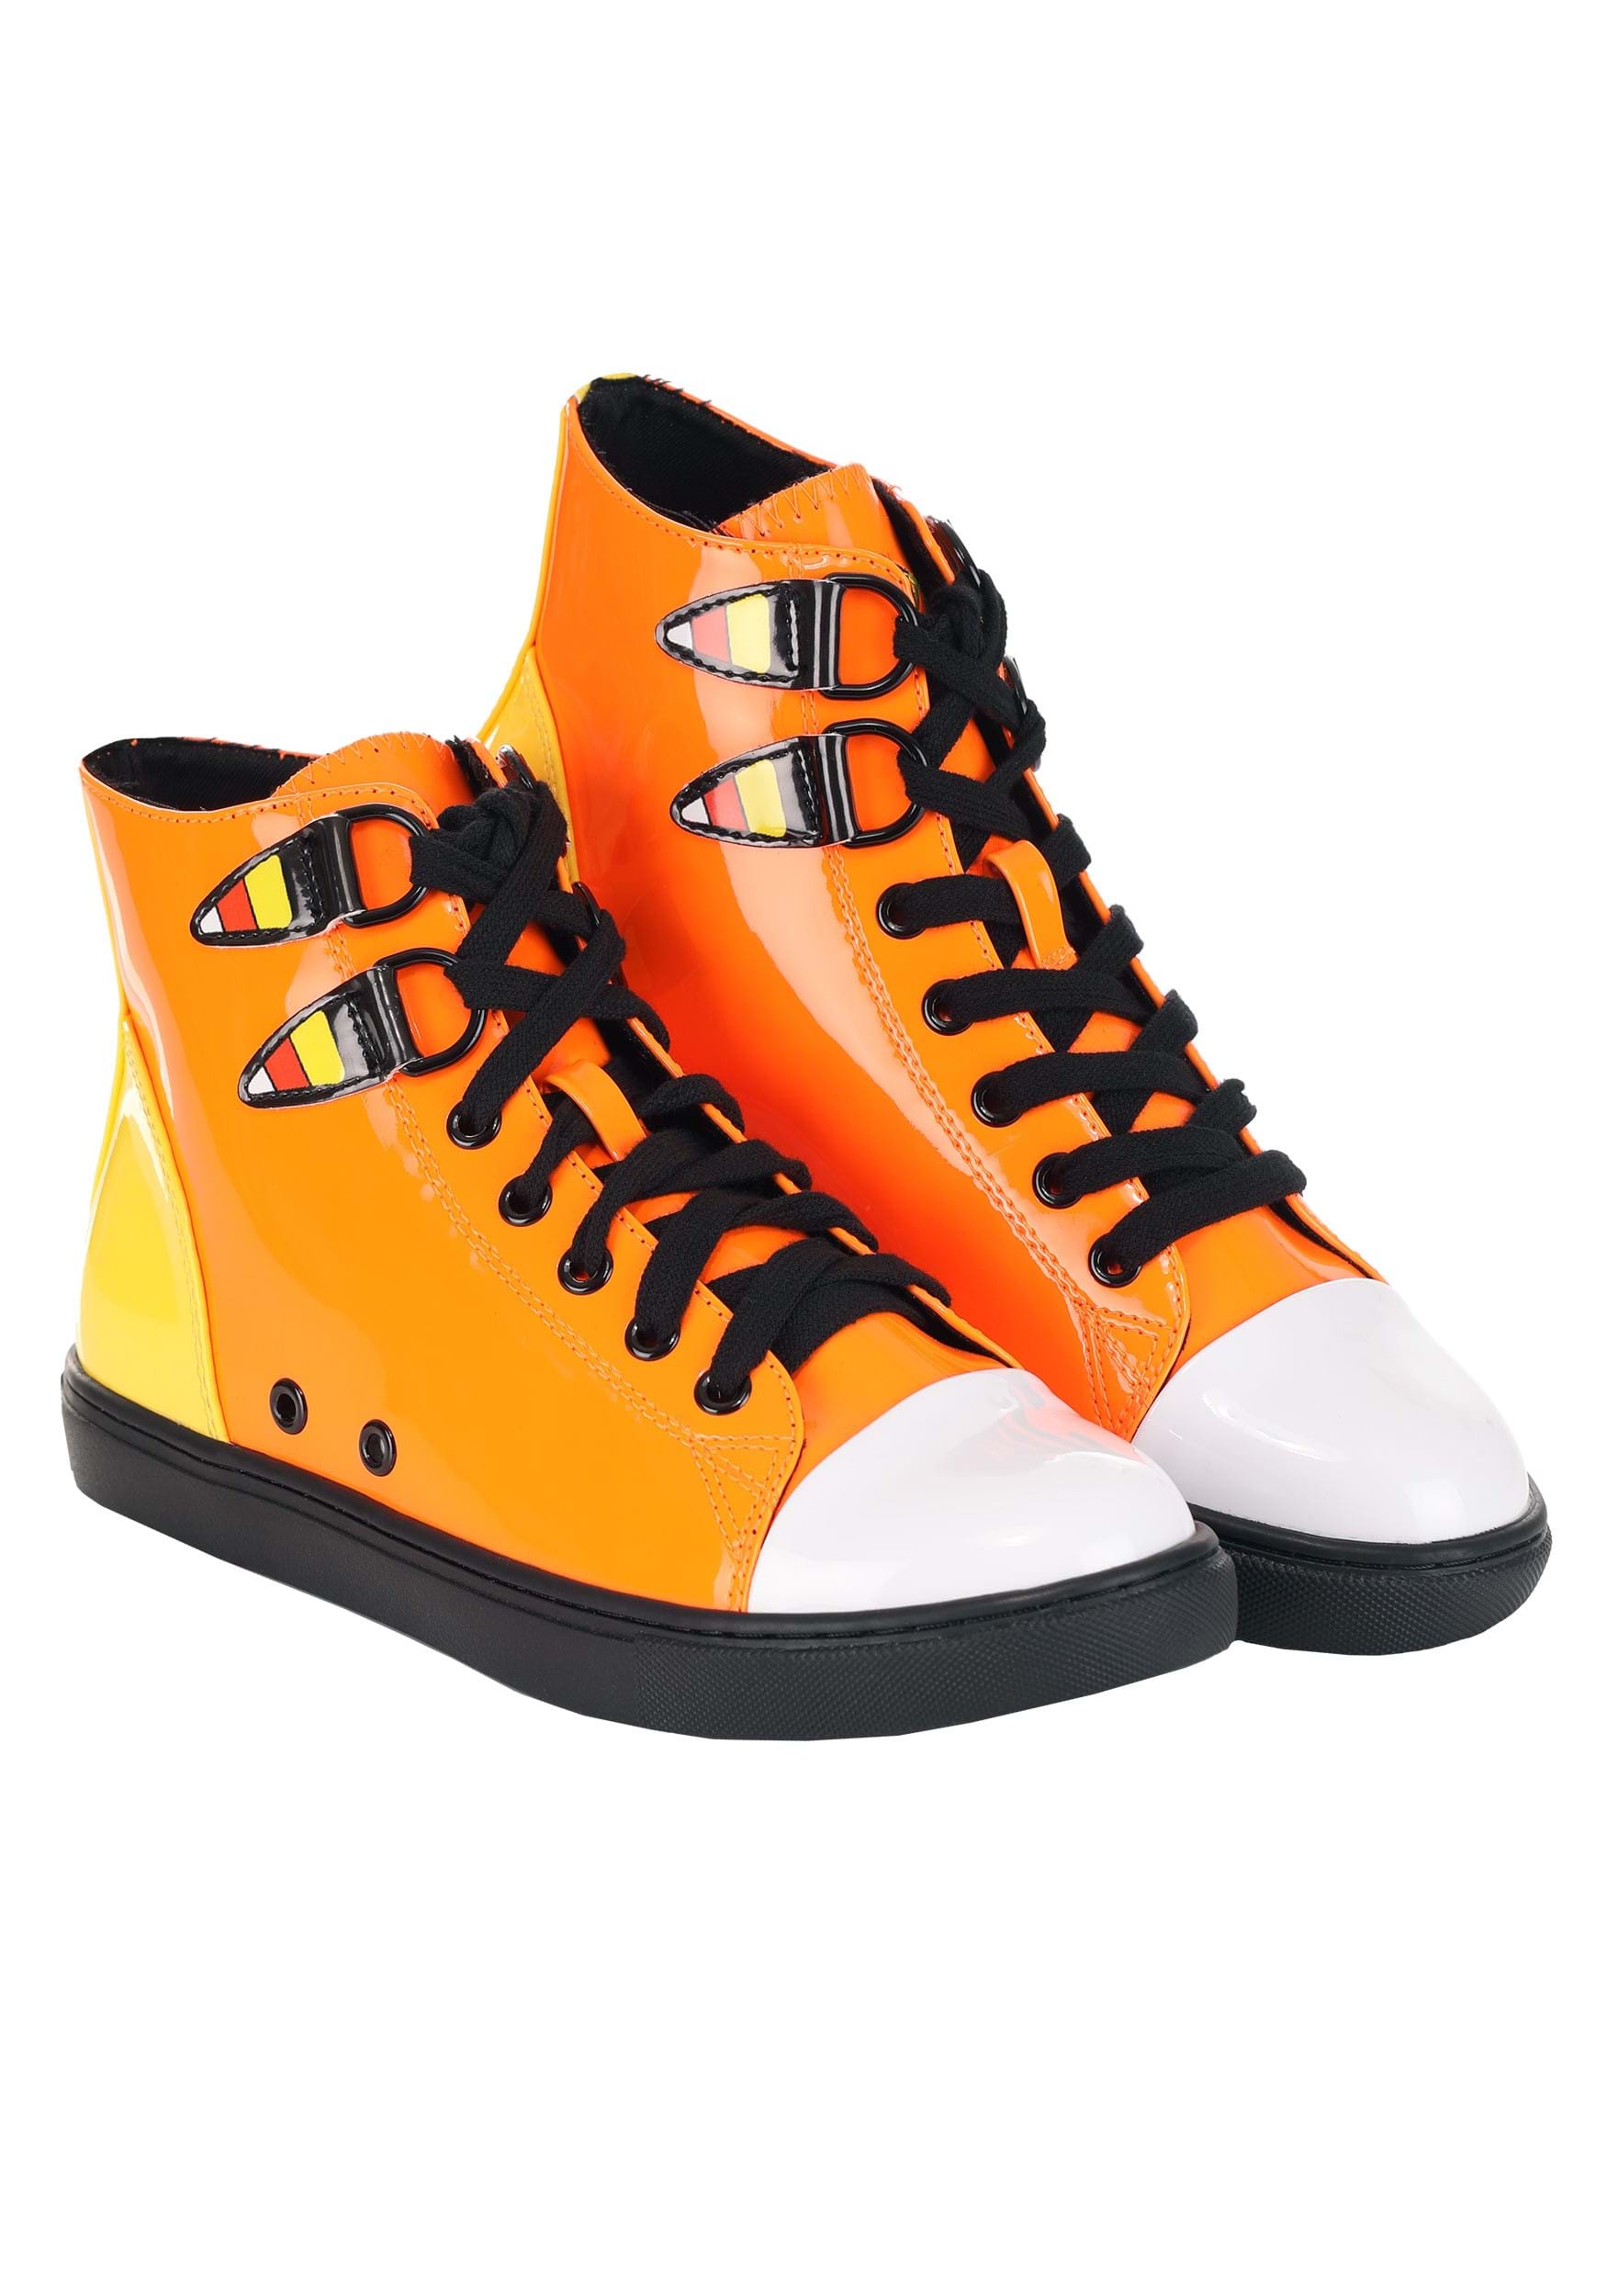 Image of Candy Corn Chelsea Patent High Top Sneakers ID SVCHELSEA-CORN-9